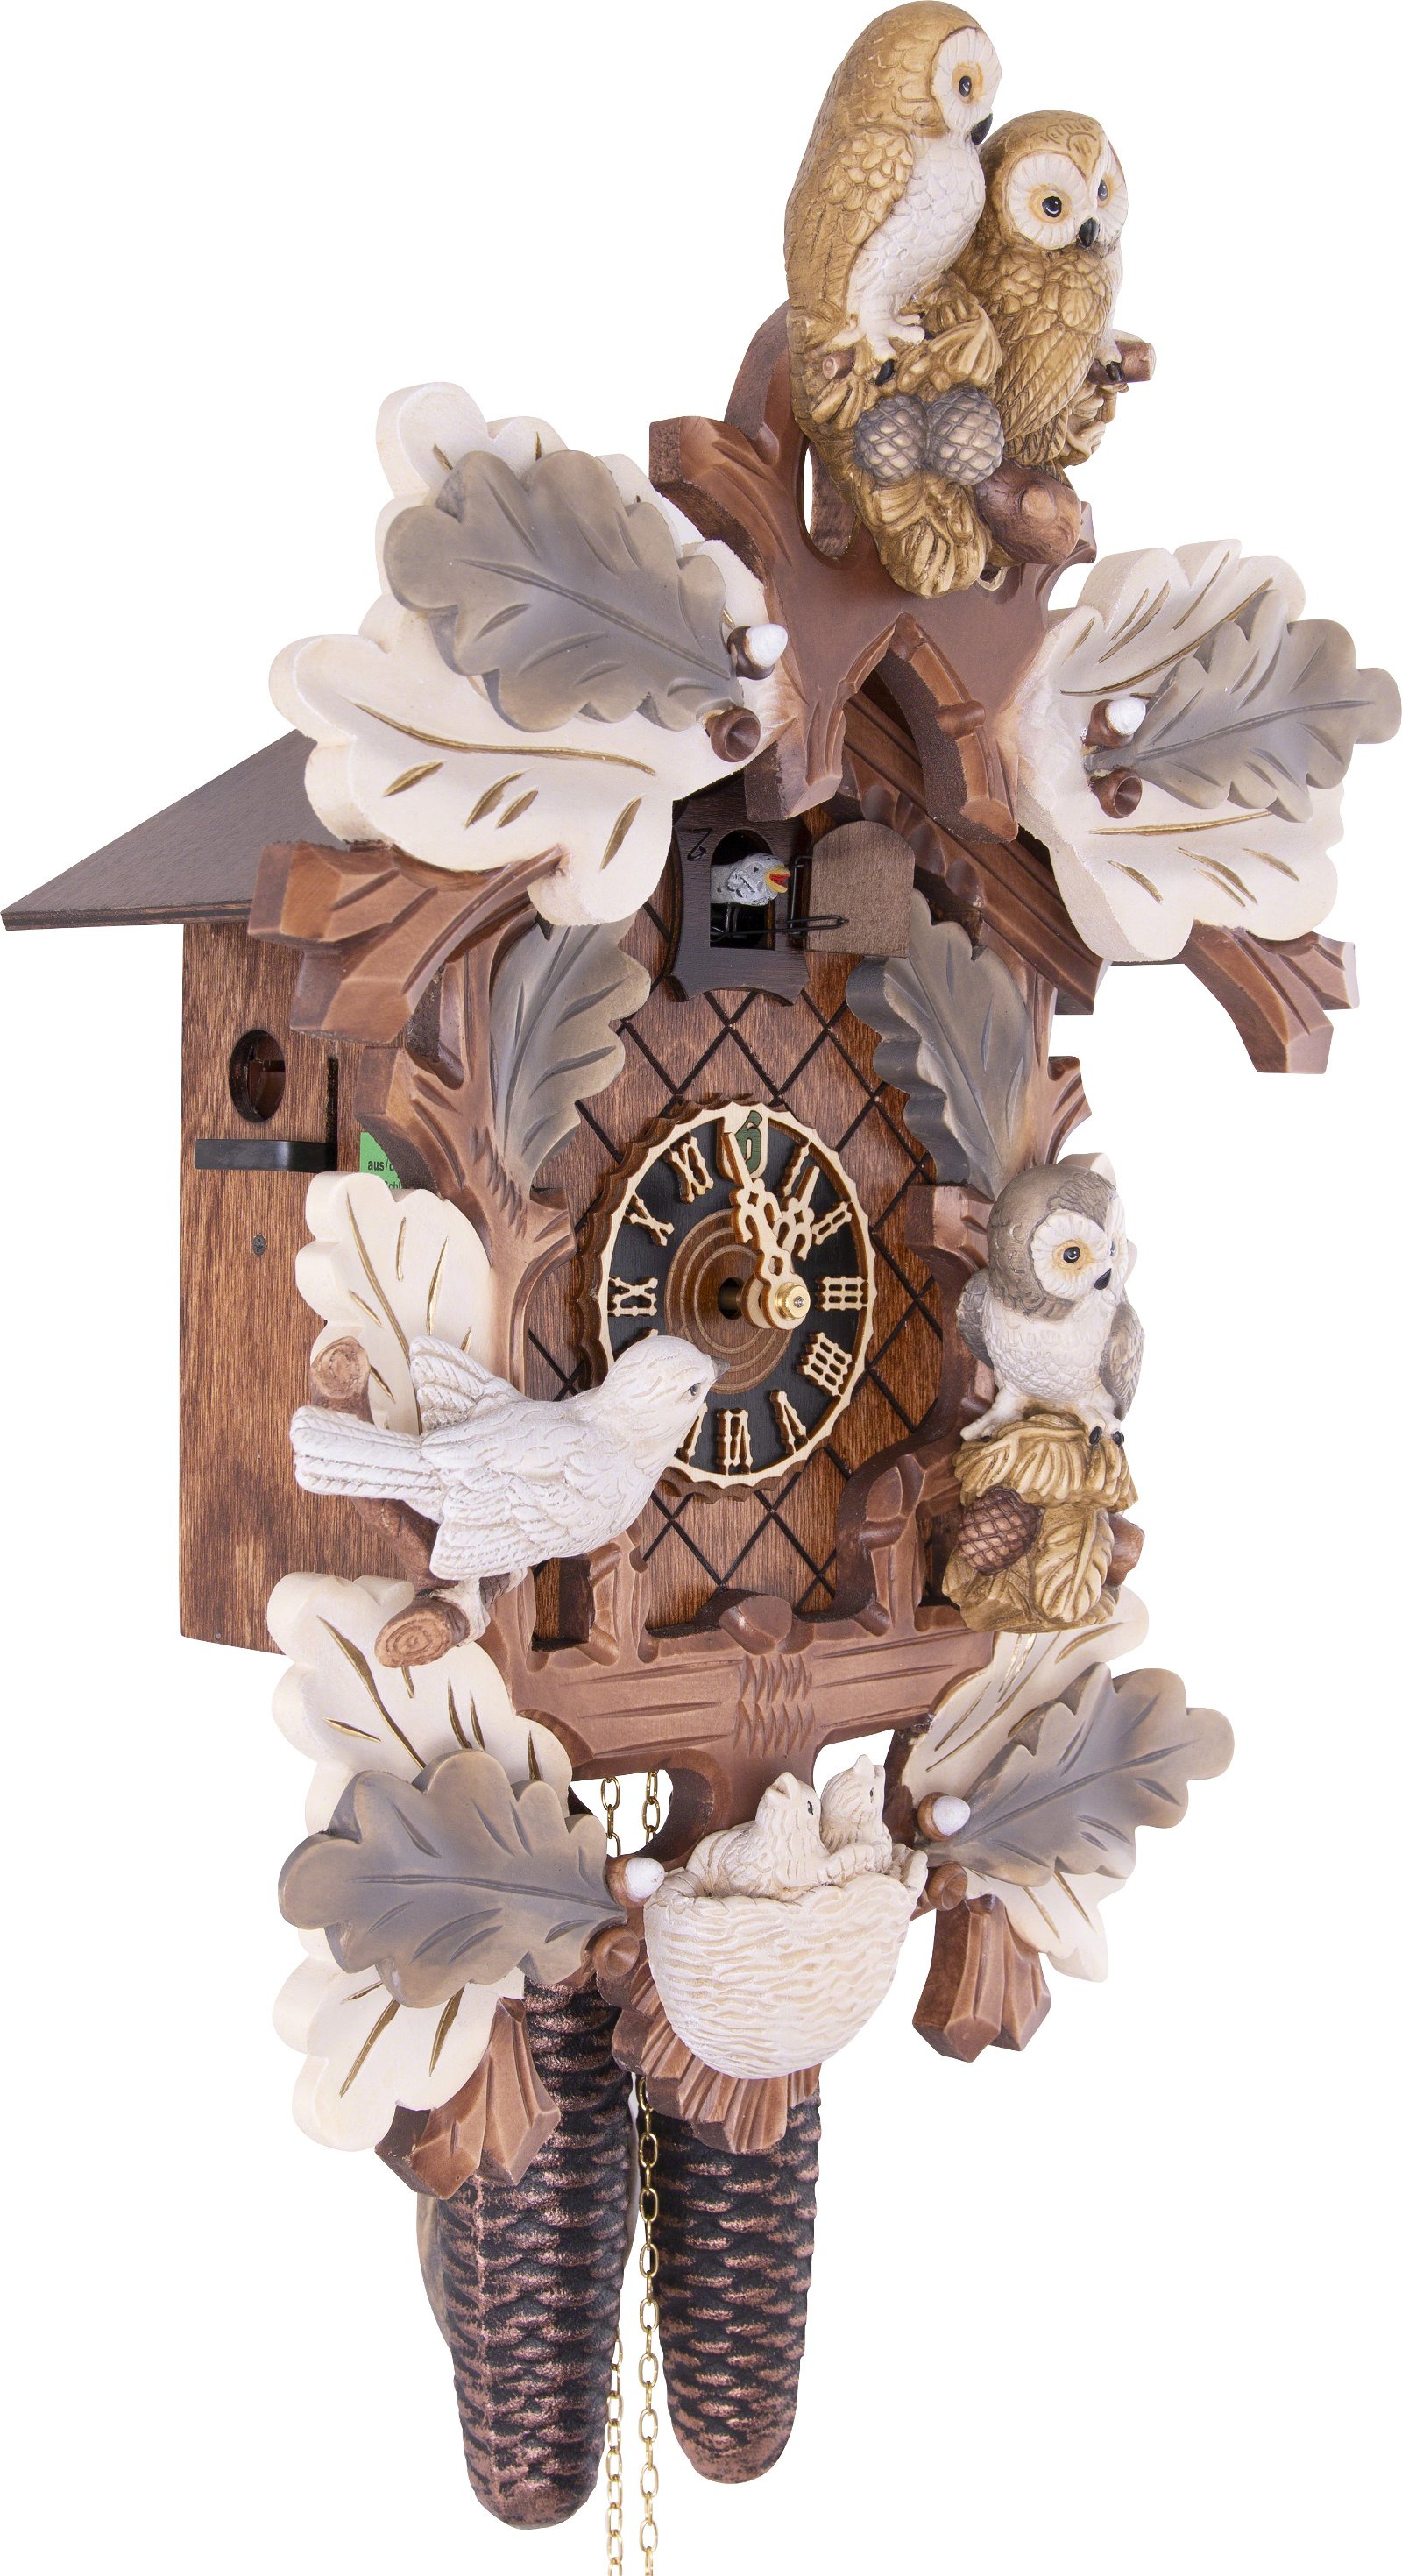 Cuckoo Clock Carved Style 8 Day Movement 46cm by Hönes